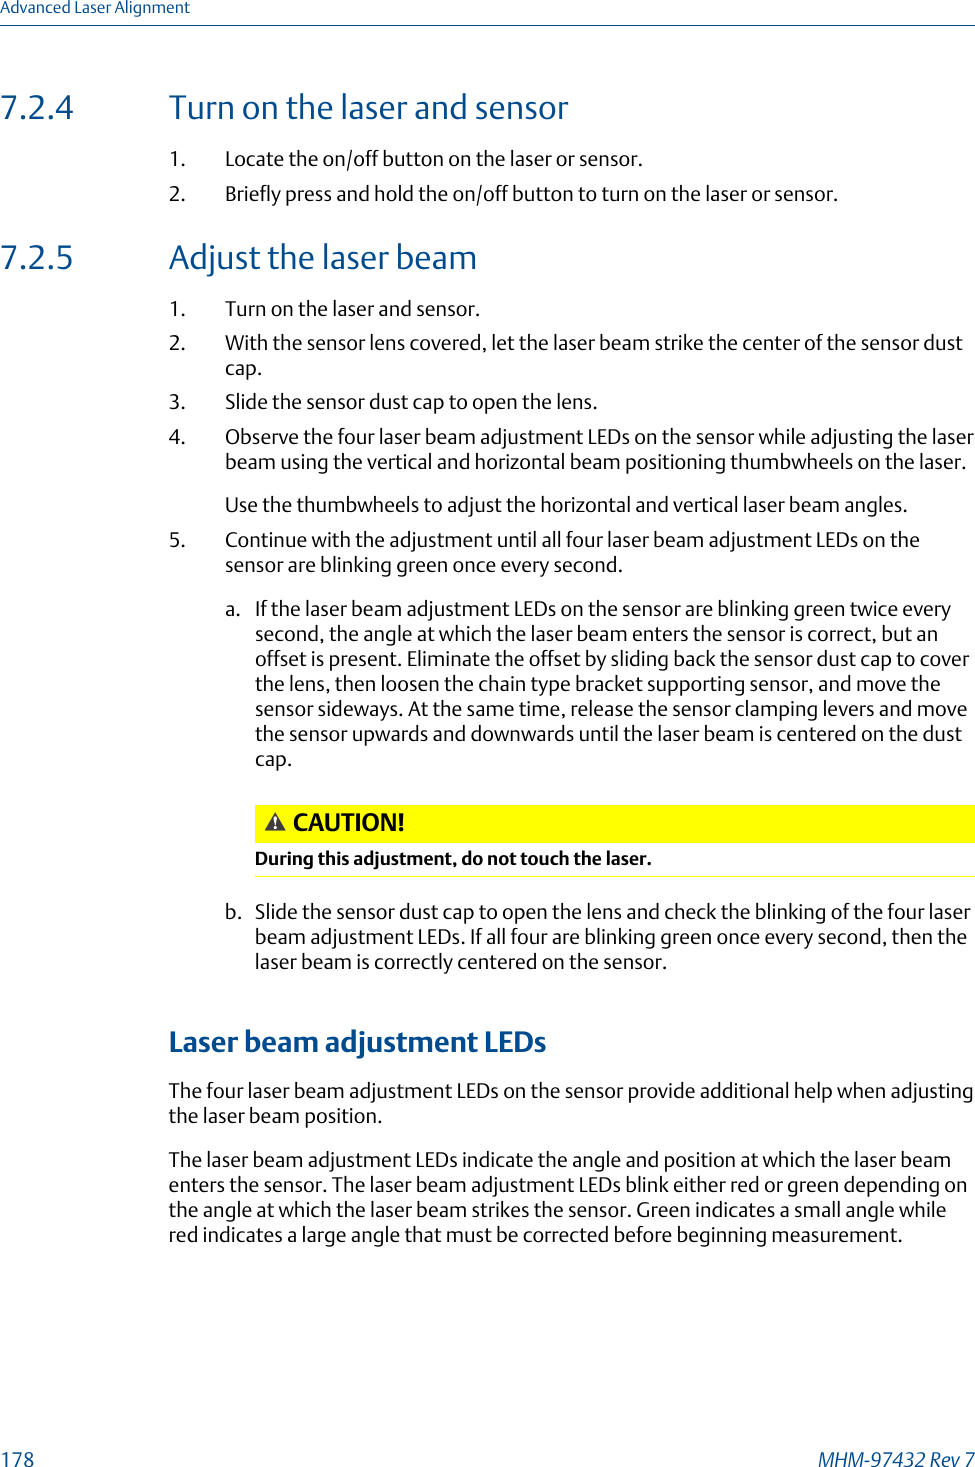 7.2.4 Turn on the laser and sensor1. Locate the on/off button on the laser or sensor.2. Briefly press and hold the on/off button to turn on the laser or sensor.7.2.5 Adjust the laser beam1. Turn on the laser and sensor.2. With the sensor lens covered, let the laser beam strike the center of the sensor dustcap.3. Slide the sensor dust cap to open the lens.4. Observe the four laser beam adjustment LEDs on the sensor while adjusting the laserbeam using the vertical and horizontal beam positioning thumbwheels on the laser.Use the thumbwheels to adjust the horizontal and vertical laser beam angles.5. Continue with the adjustment until all four laser beam adjustment LEDs on thesensor are blinking green once every second.a. If the laser beam adjustment LEDs on the sensor are blinking green twice everysecond, the angle at which the laser beam enters the sensor is correct, but anoffset is present. Eliminate the offset by sliding back the sensor dust cap to coverthe lens, then loosen the chain type bracket supporting sensor, and move thesensor sideways. At the same time, release the sensor clamping levers and movethe sensor upwards and downwards until the laser beam is centered on the dustcap.CAUTION!During this adjustment, do not touch the laser.b. Slide the sensor dust cap to open the lens and check the blinking of the four laserbeam adjustment LEDs. If all four are blinking green once every second, then thelaser beam is correctly centered on the sensor.Laser beam adjustment LEDsThe four laser beam adjustment LEDs on the sensor provide additional help when adjustingthe laser beam position.The laser beam adjustment LEDs indicate the angle and position at which the laser beamenters the sensor. The laser beam adjustment LEDs blink either red or green depending onthe angle at which the laser beam strikes the sensor. Green indicates a small angle whilered indicates a large angle that must be corrected before beginning measurement.Advanced Laser Alignment178 MHM-97432 Rev 7